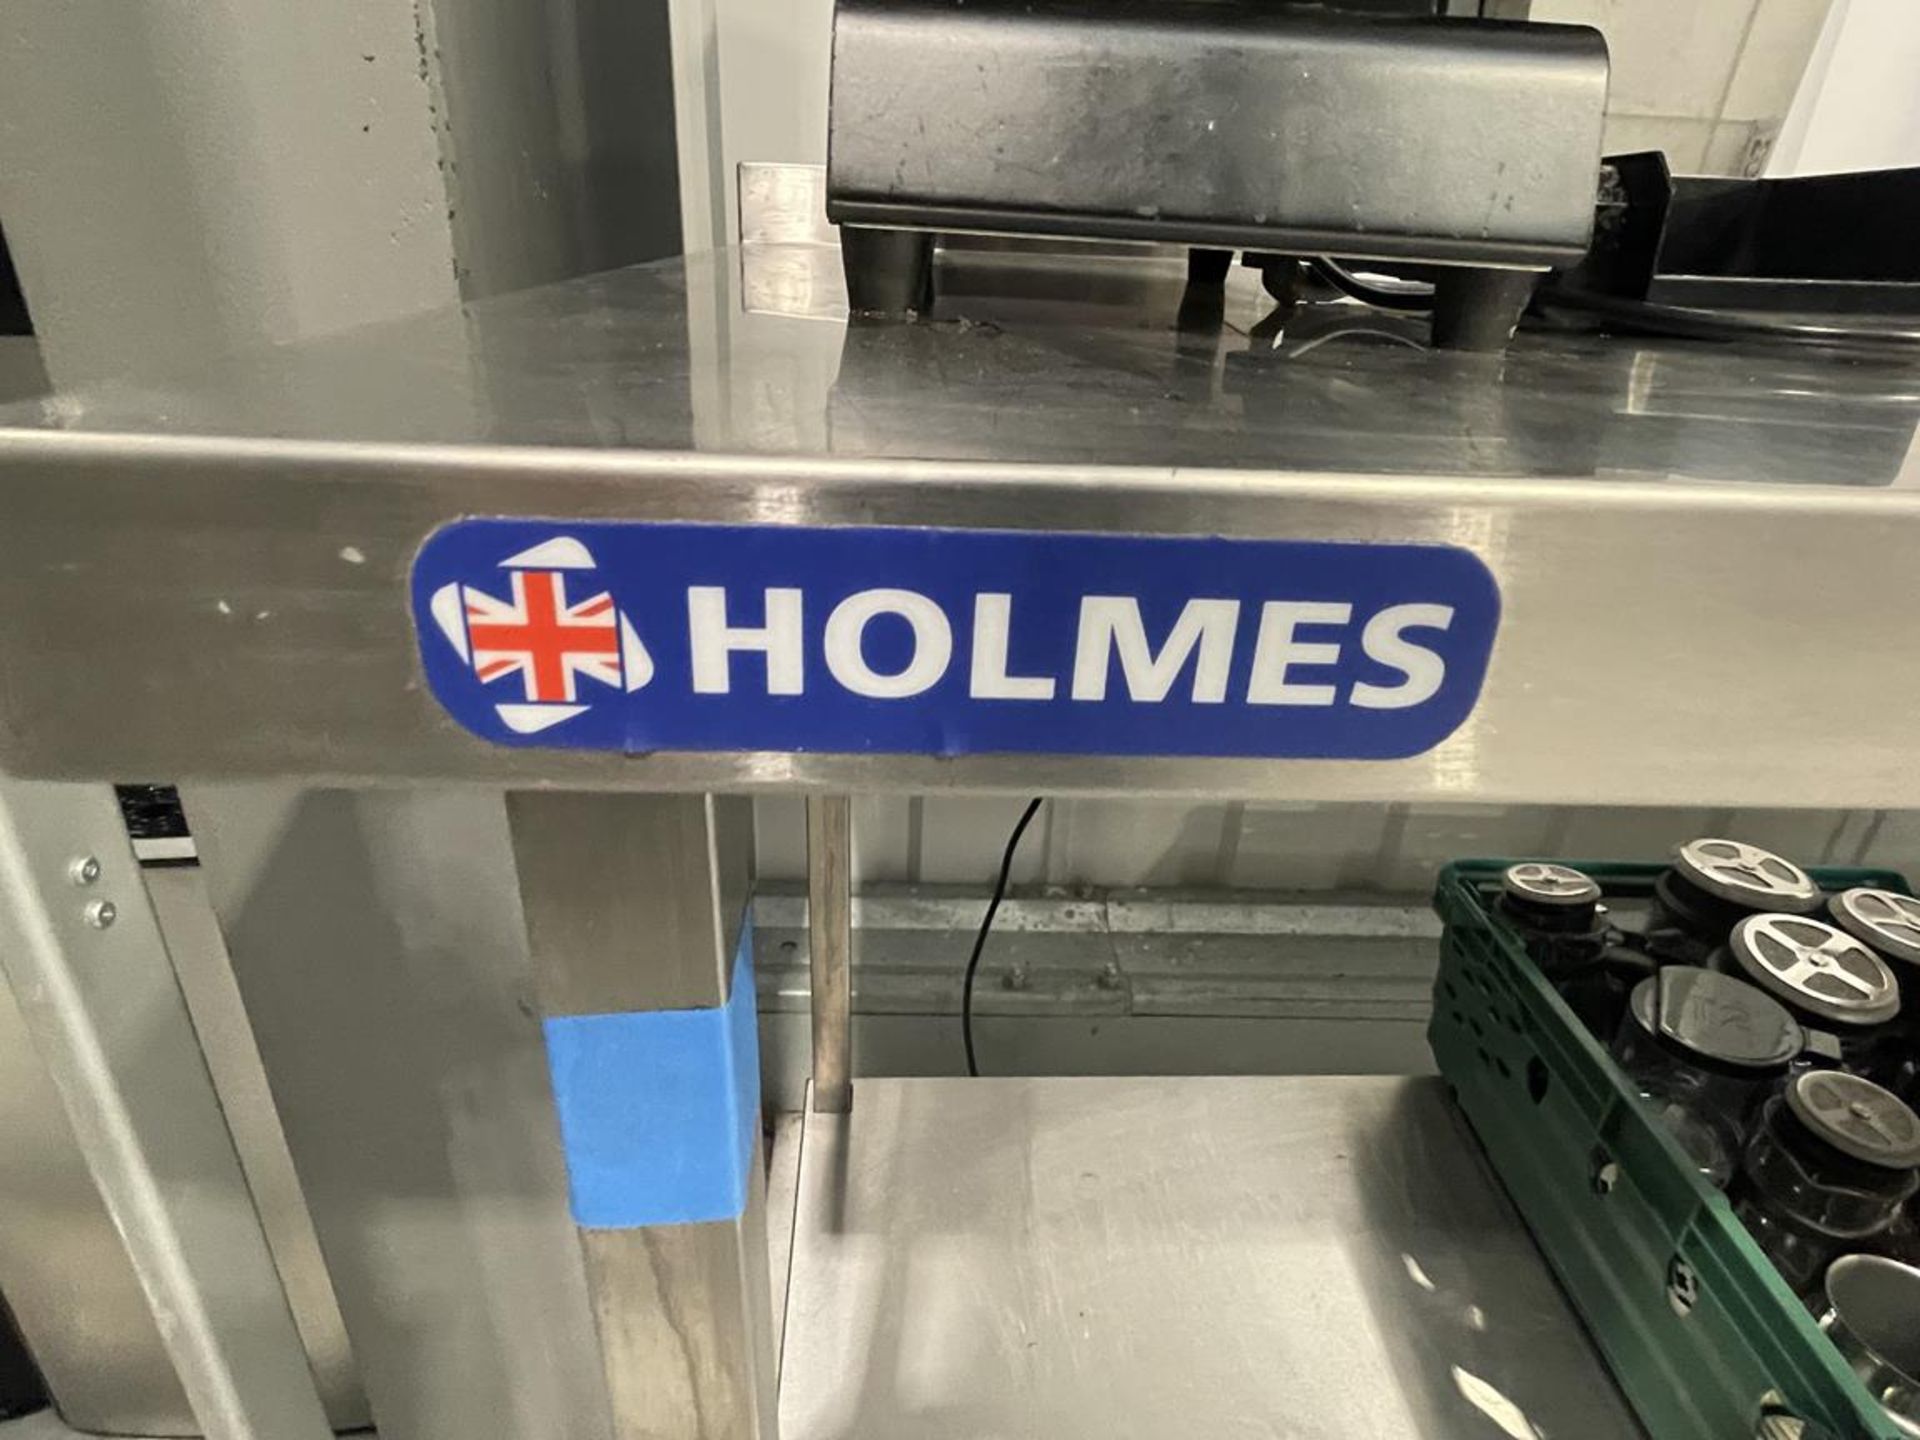 Holmes, stainless steel preparation table, 1800 x 700 x 890mm approx. with quantity coffee pots and - Bild 2 aus 5